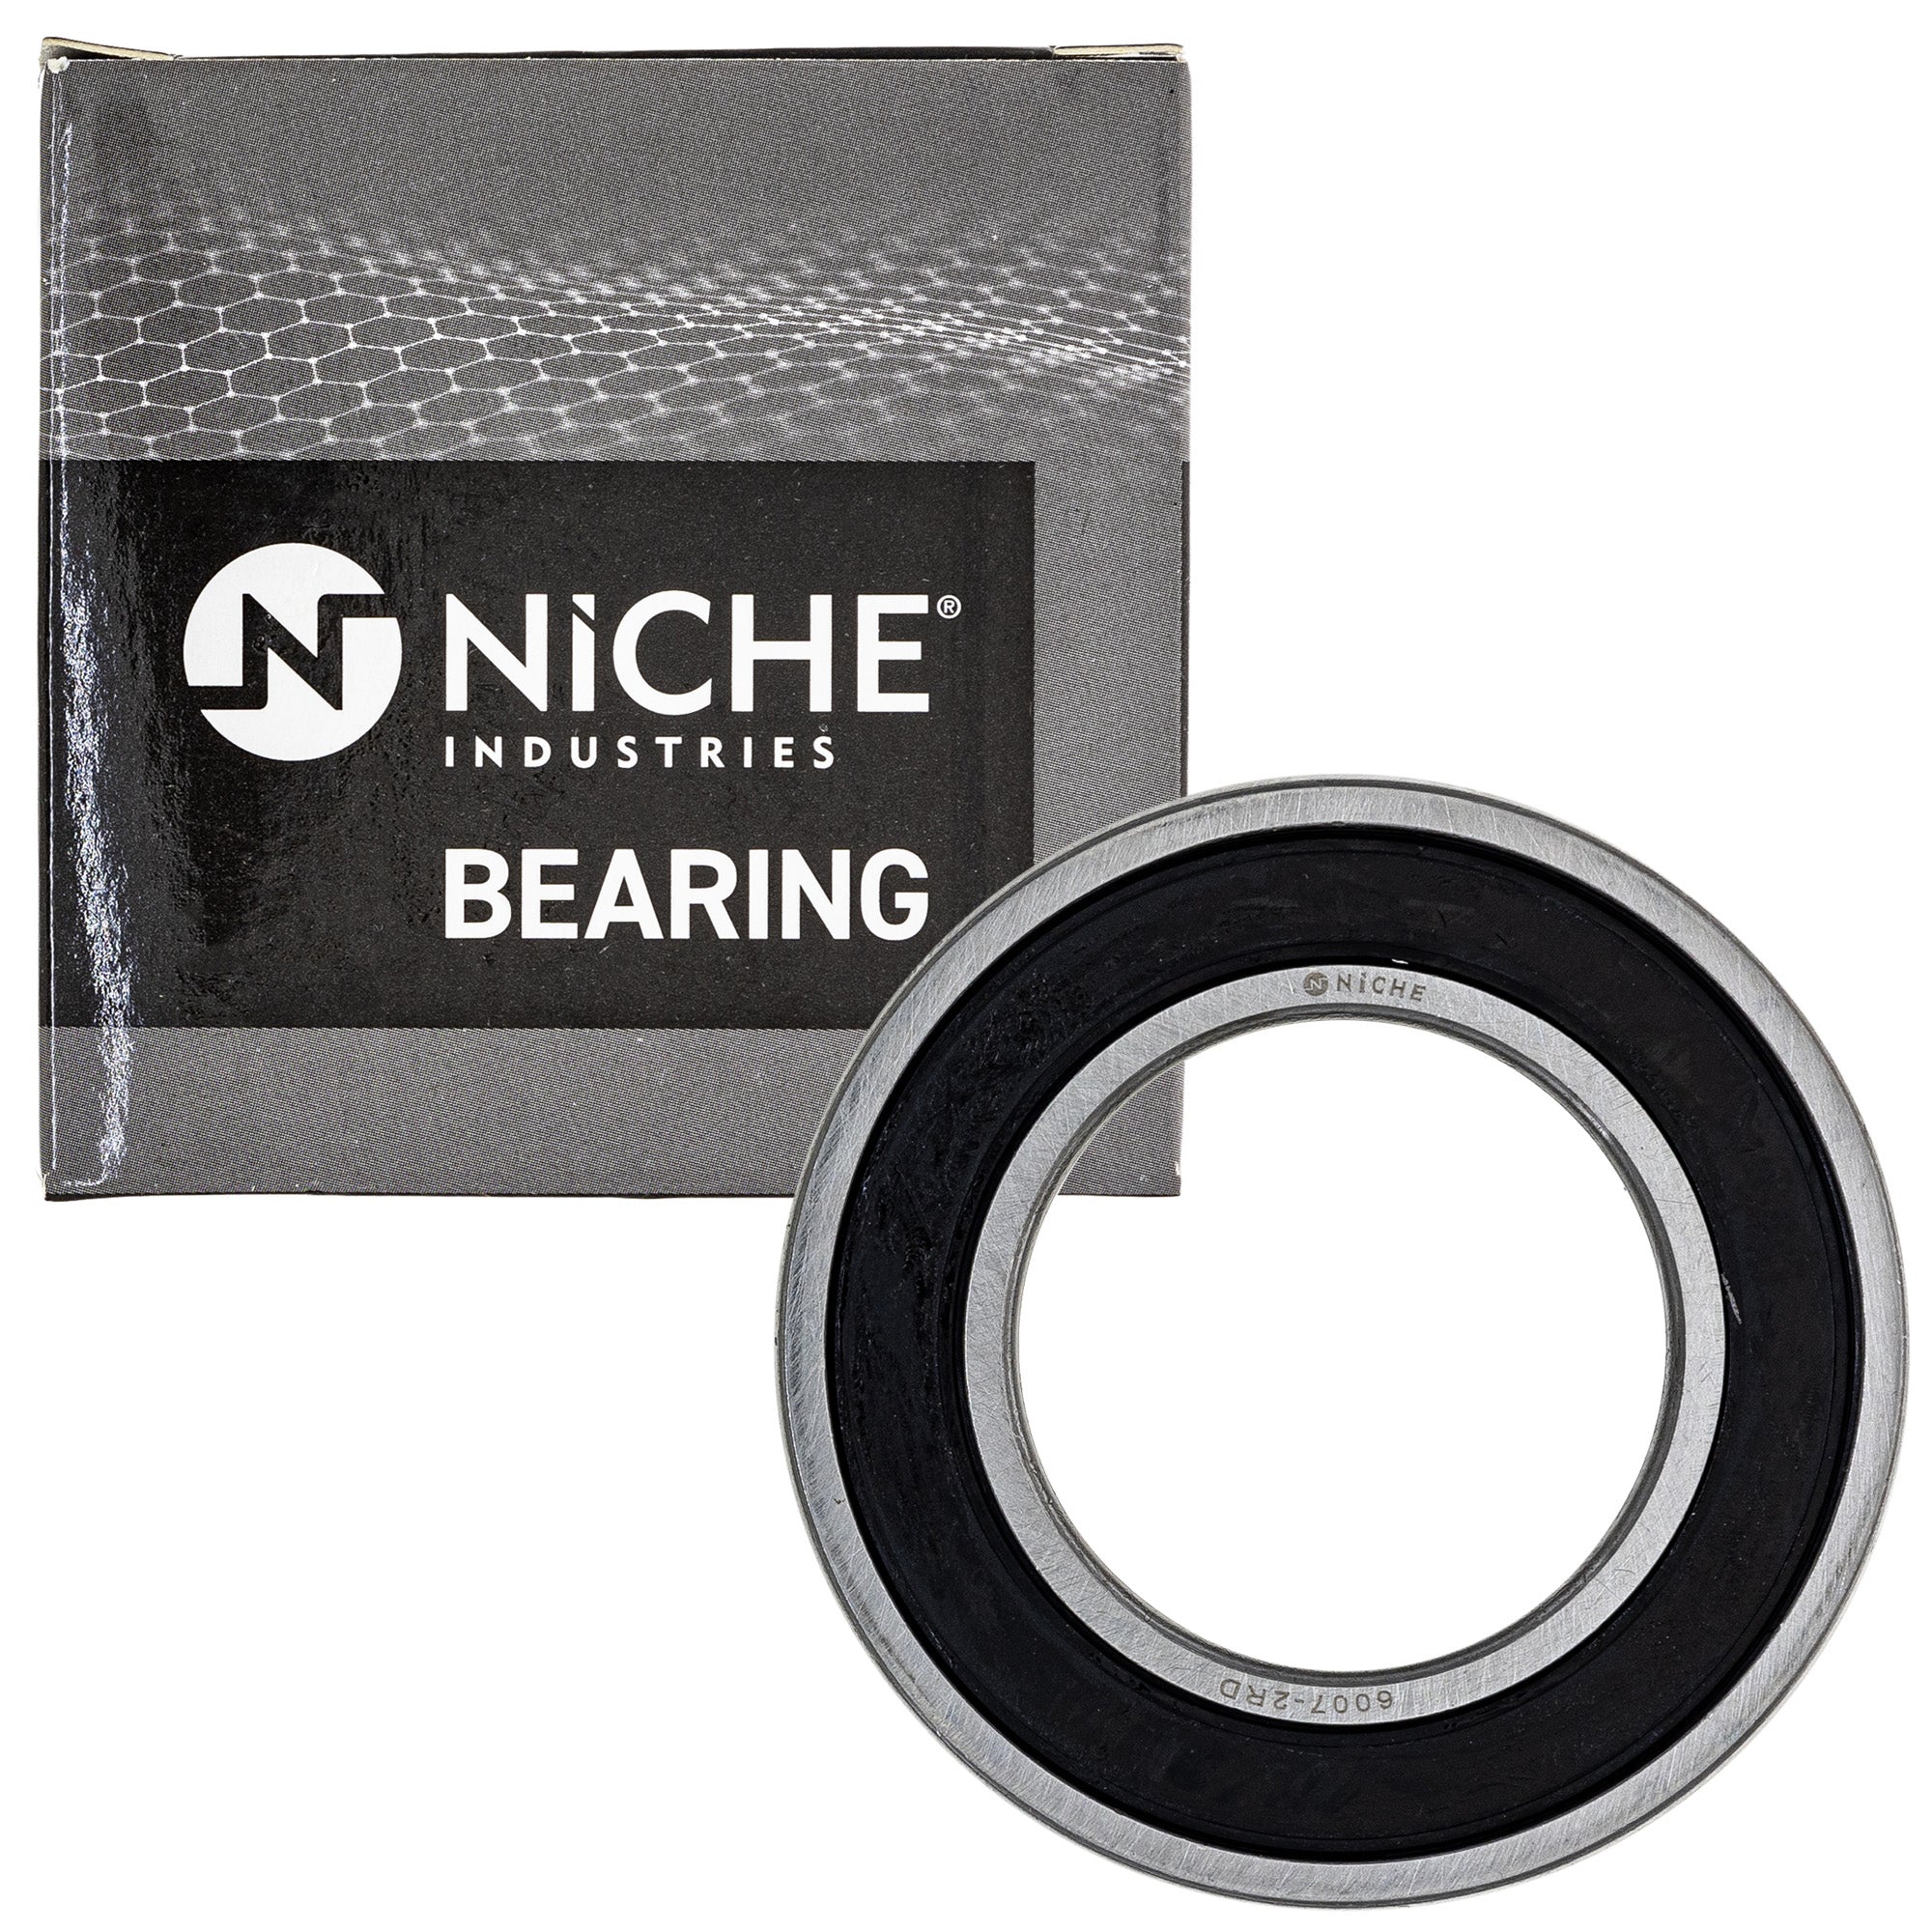 NICHE MK1009201 Wheel Bearing Seal Kit for zOTHER Grizzly Banshee